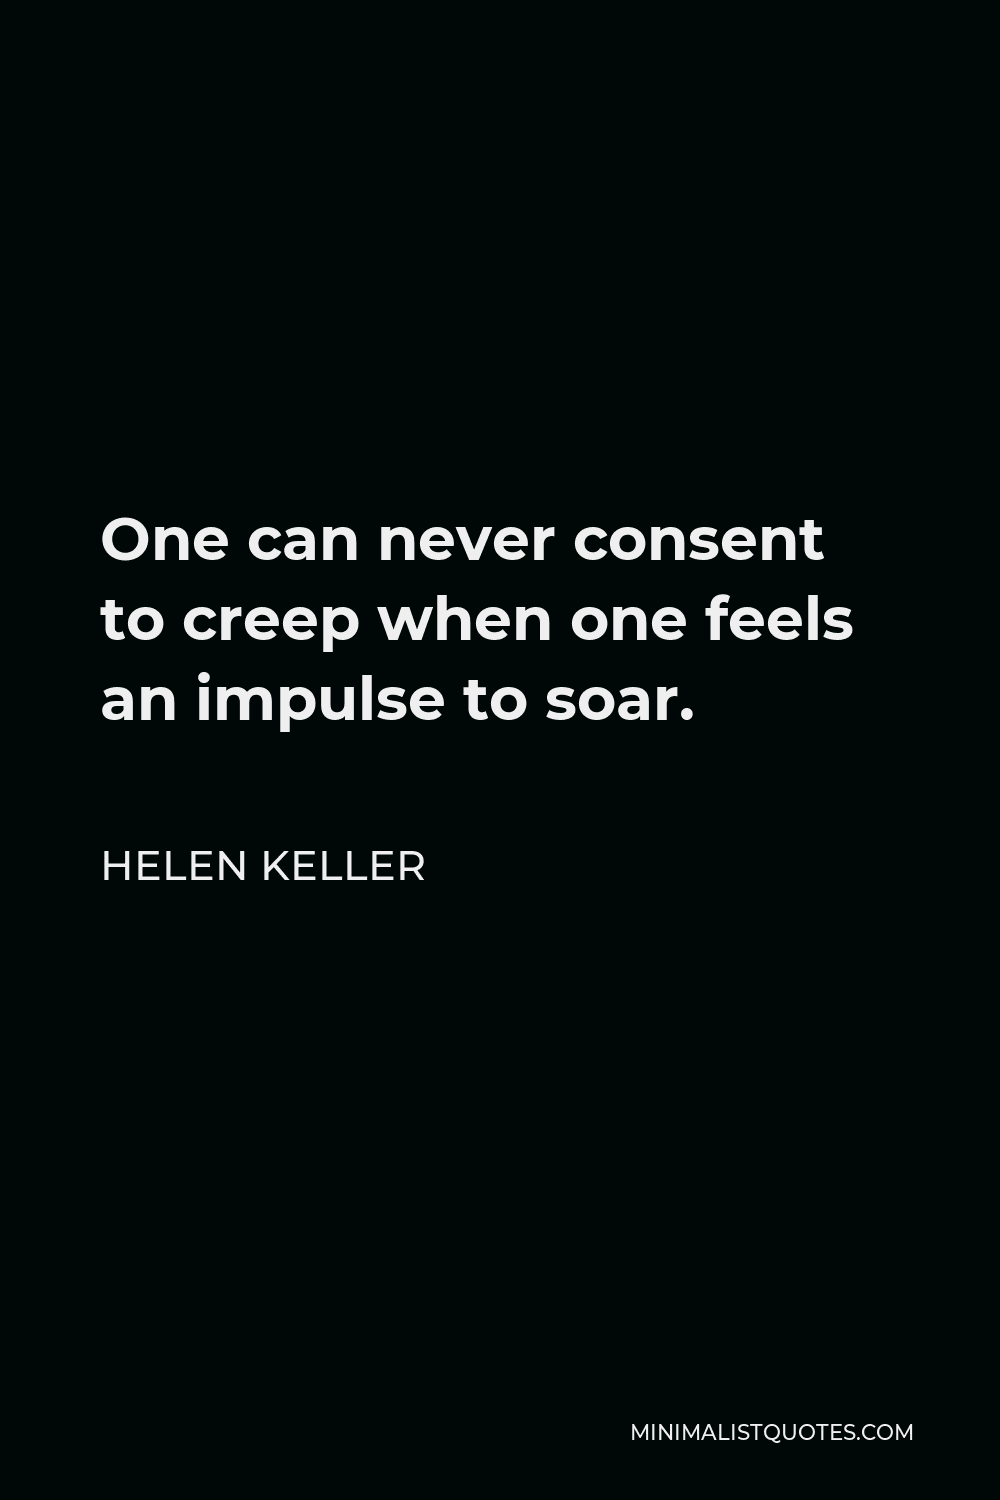 Helen Keller Quote - One can never consent to creep when one feels an impulse to soar.